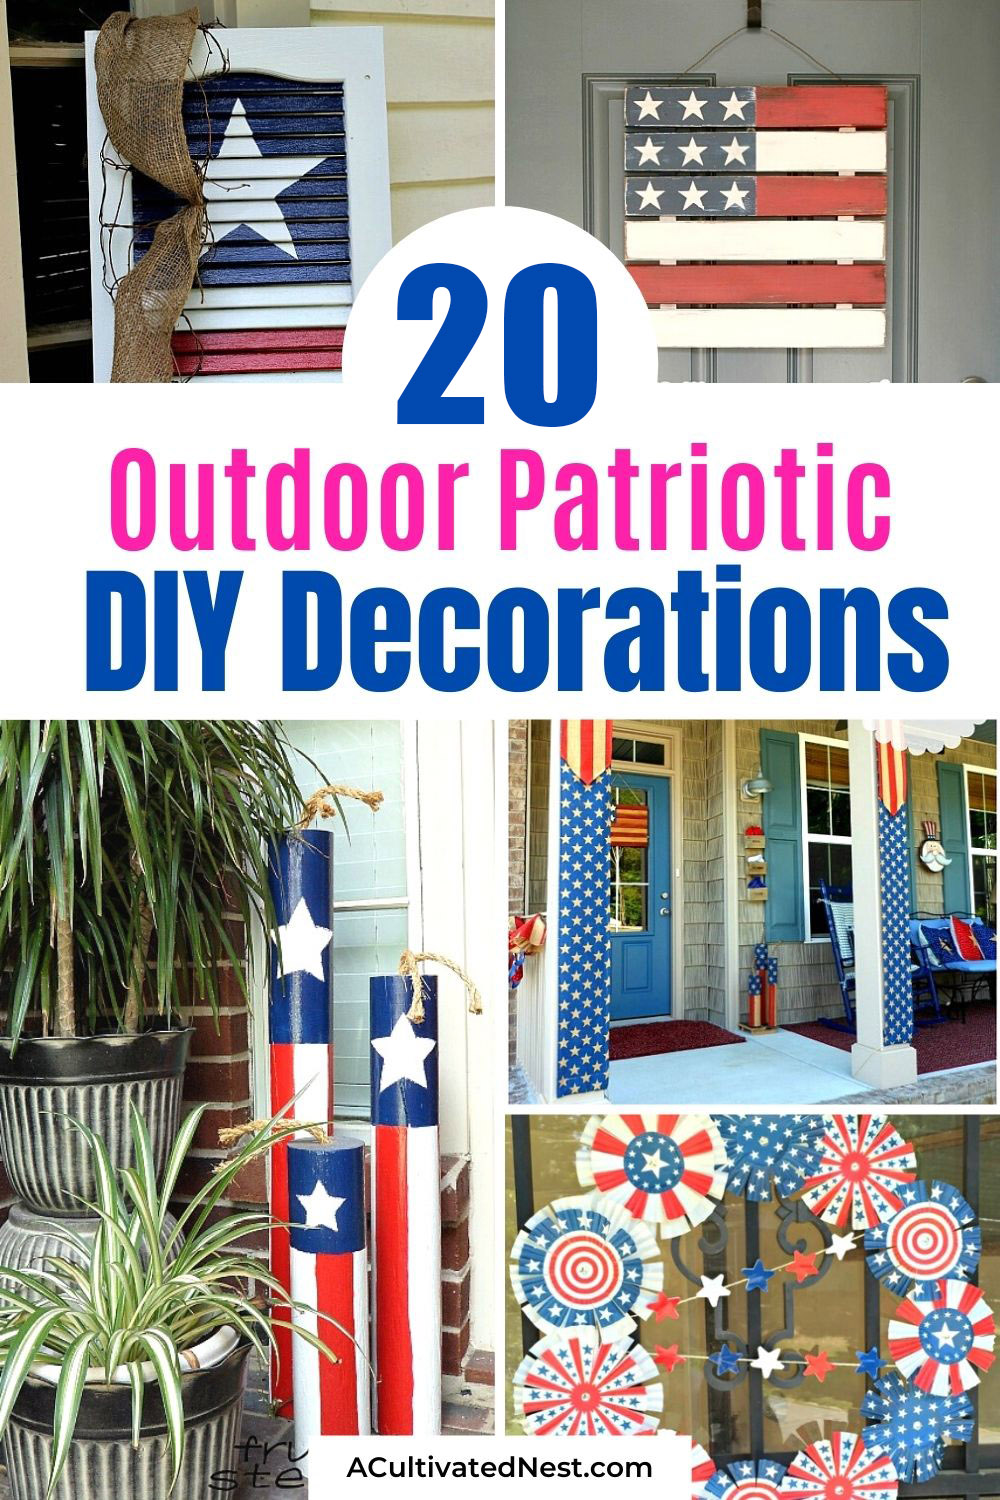 20 Cute DIY Patriotic Outdoor Decorations- Make your yard or front porch extra festive this year with these DIY patriotic outdoor decorations! They're perfect for Memorial Day or the Fourth of July! | Fourth of July decorations, Memorial Day decorations, flag themed décor #FourthOfJuly #MemorialDay #diyProjects #patrioticDIY #ACultivatedNest